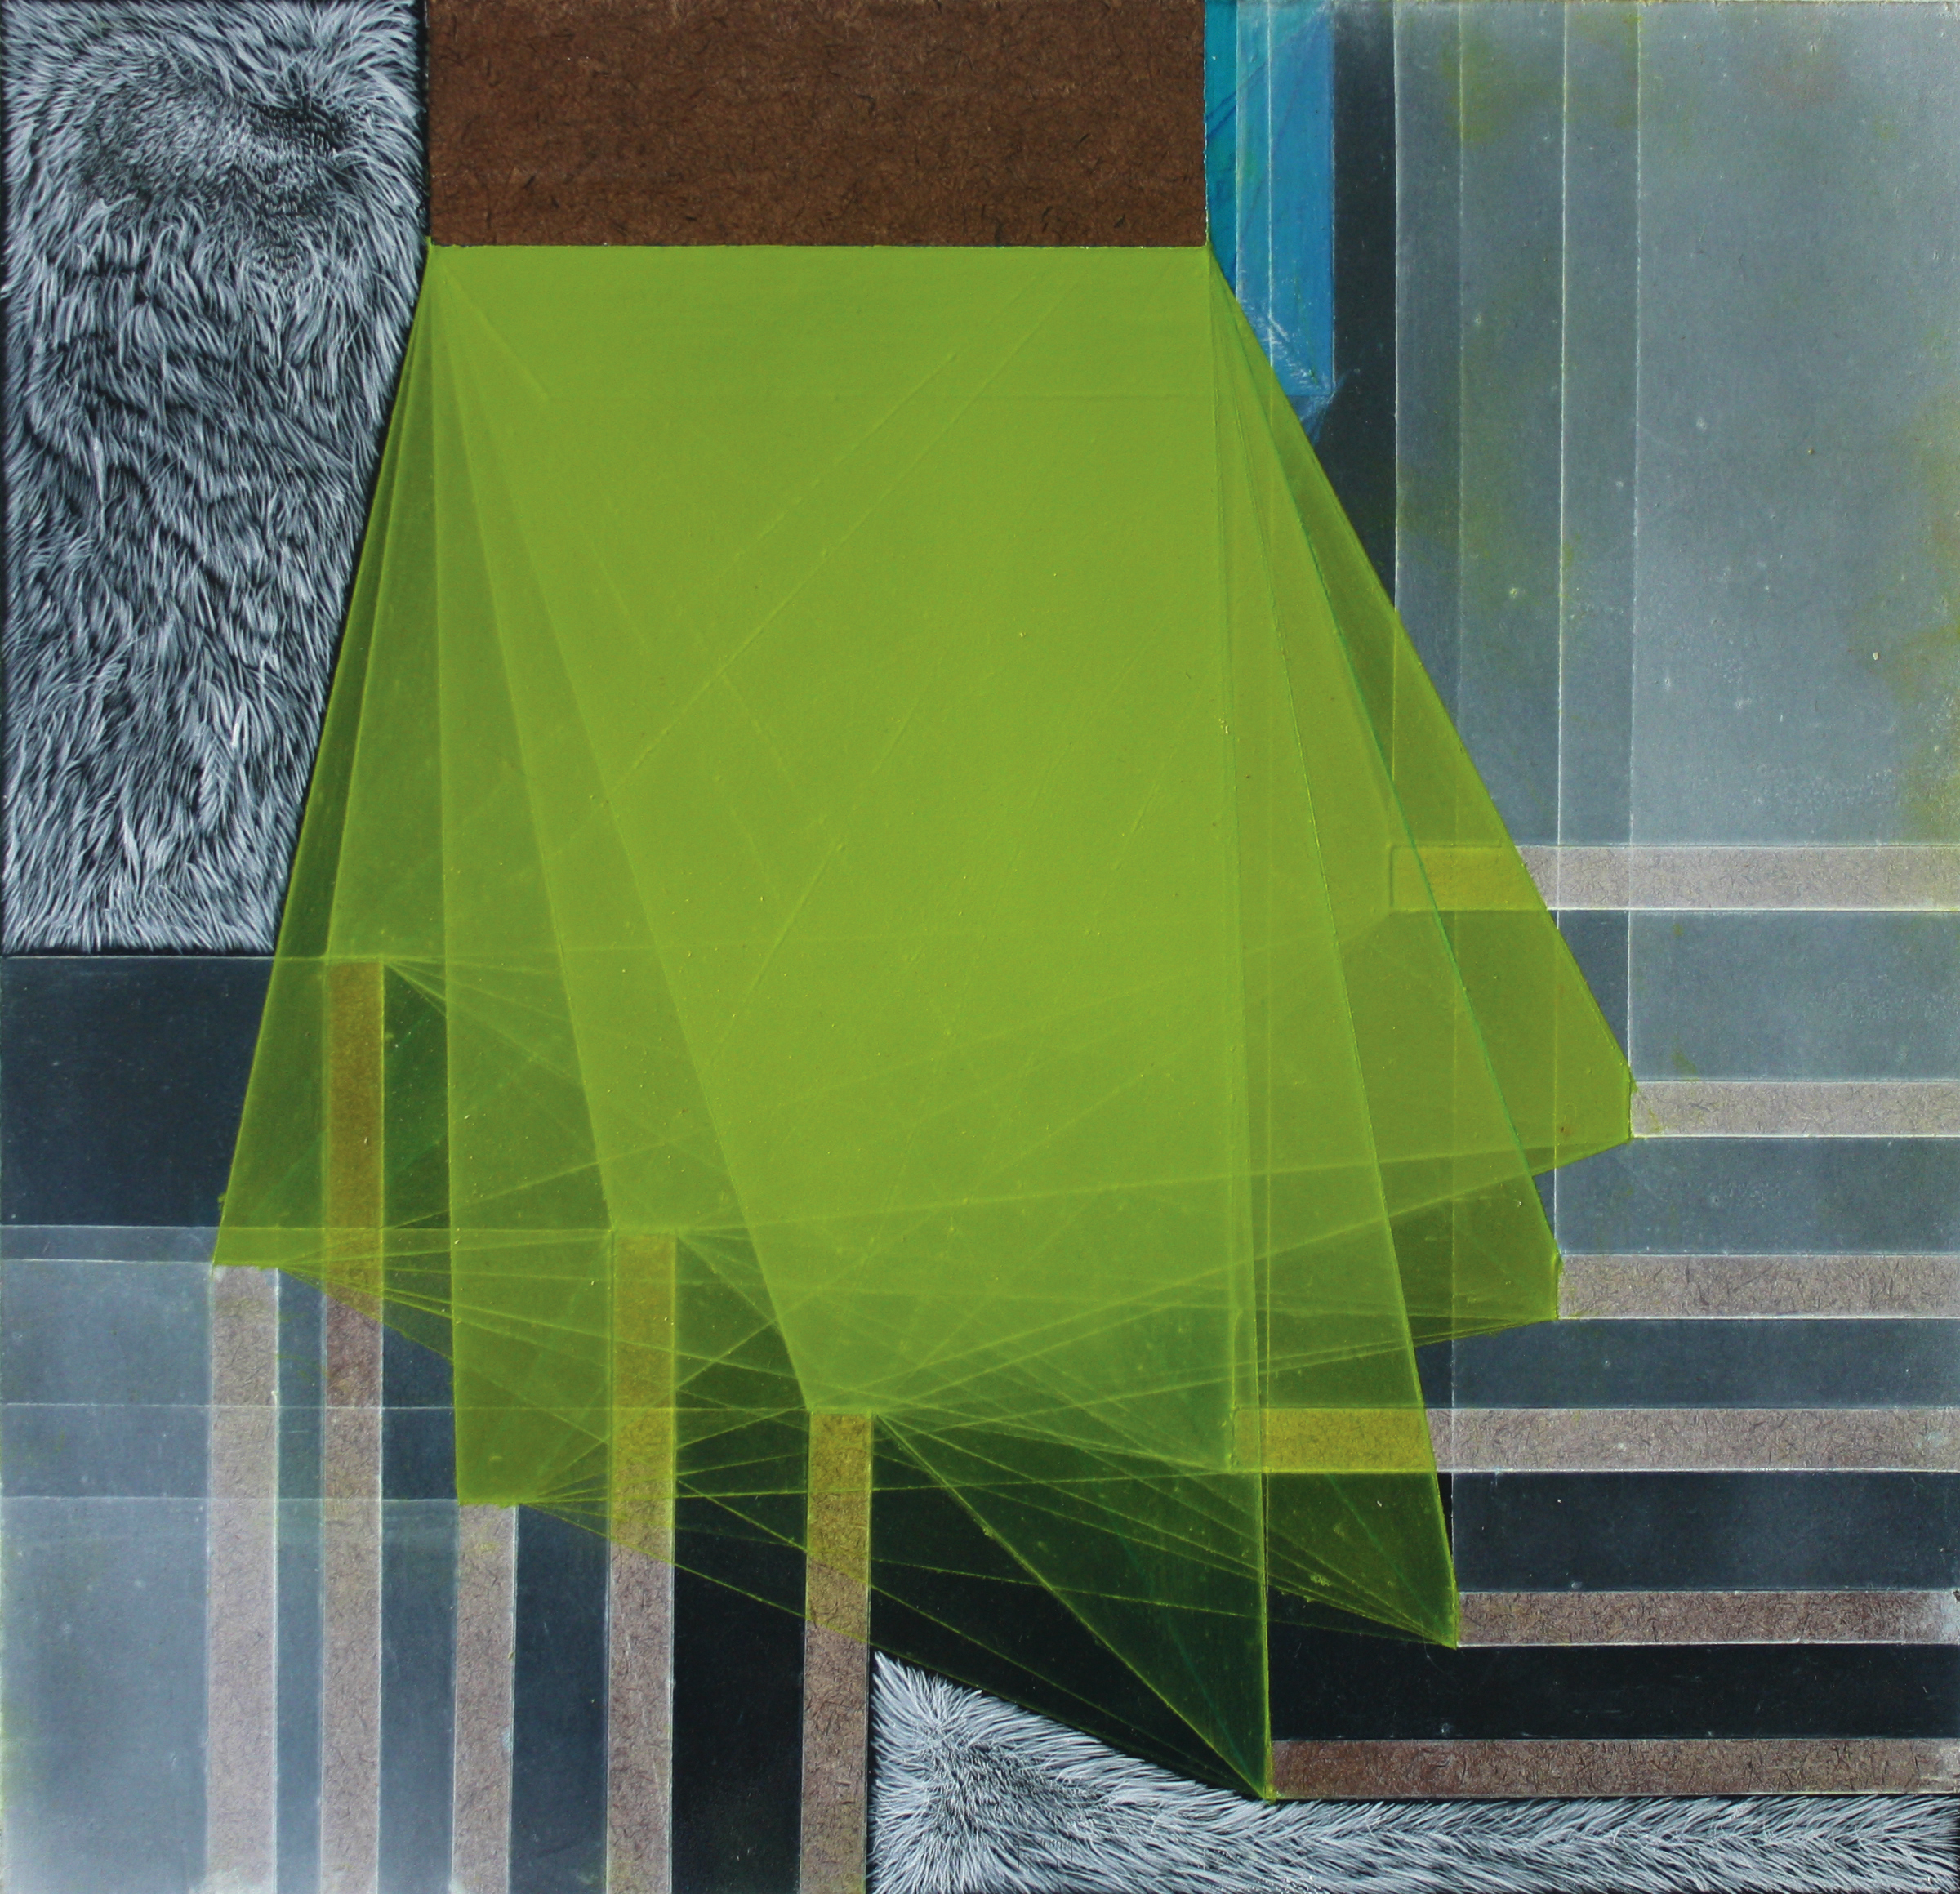  Threshold Composition no.6. Gouache, oil and ink on panel, 11.5" x 11.75", 2013 